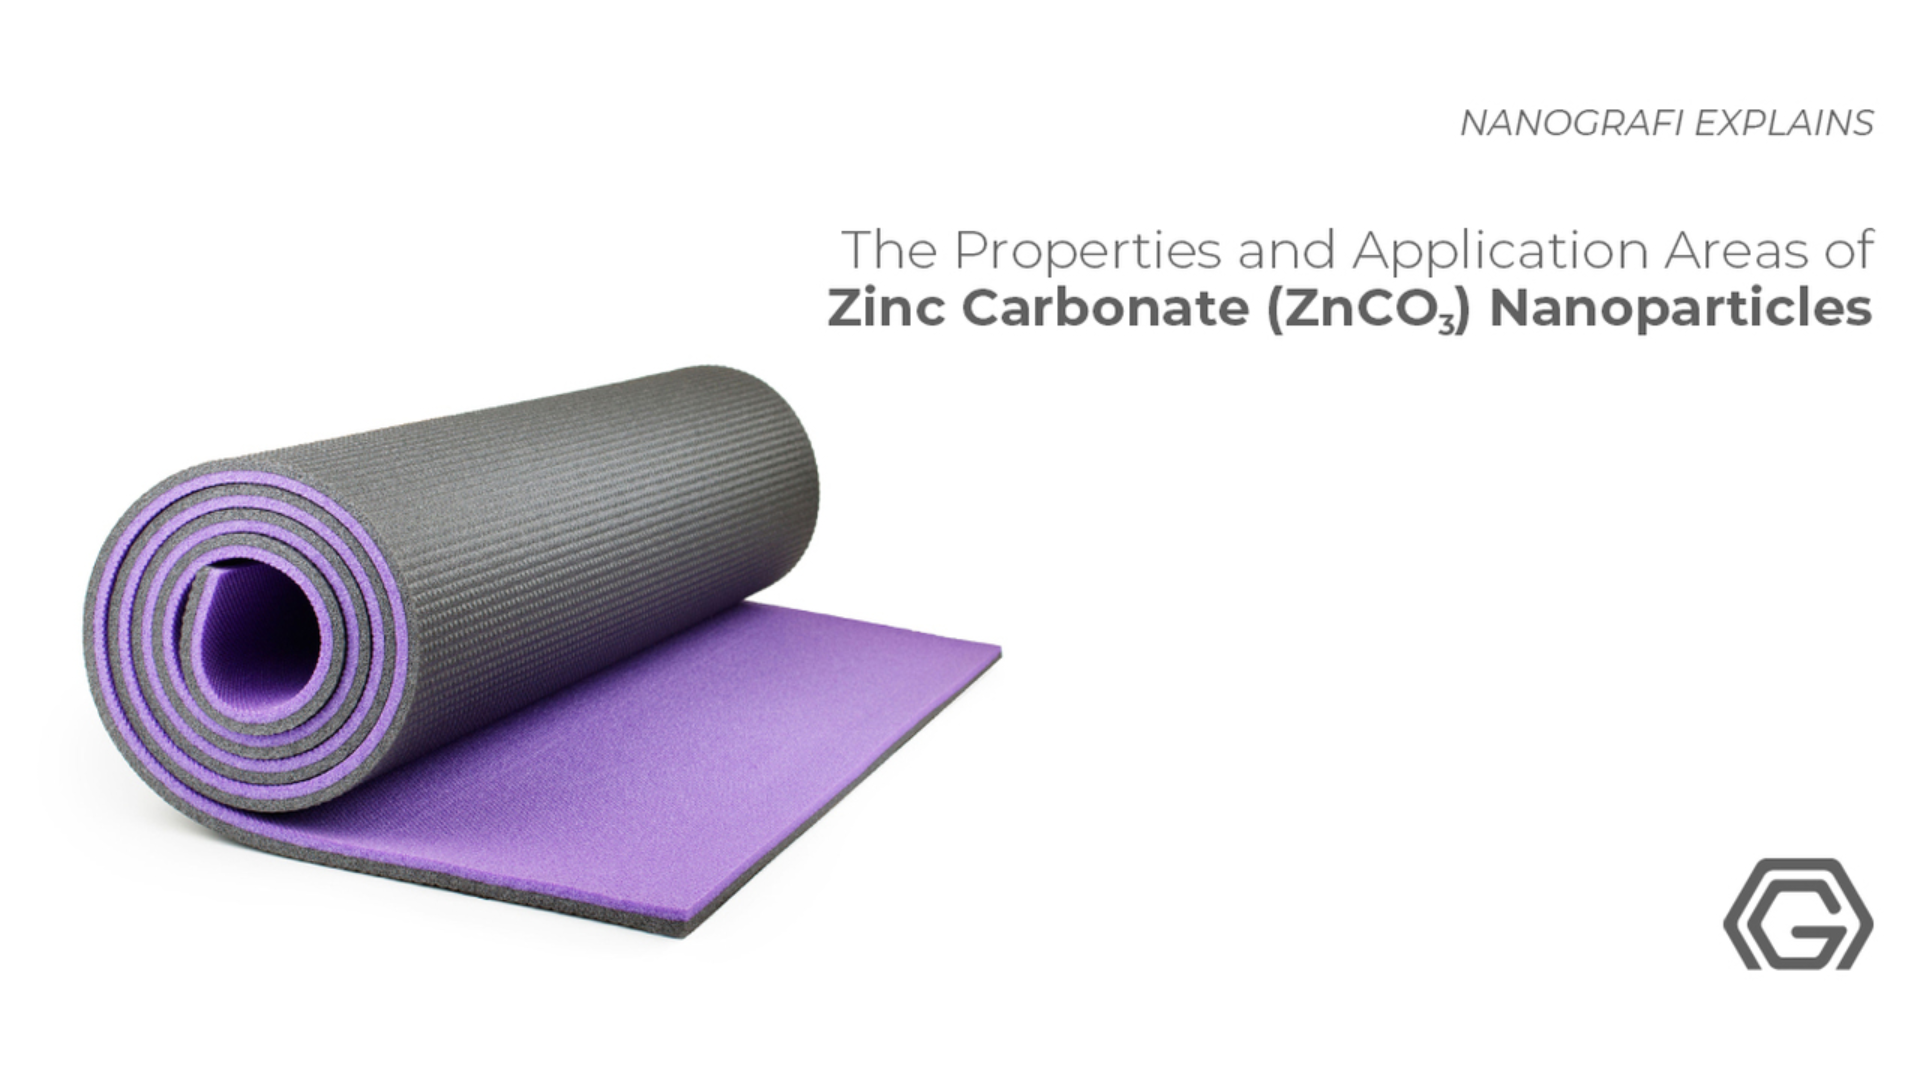 Properties and application areas of Zinc carbonate (ZnCO3) nanoparticles